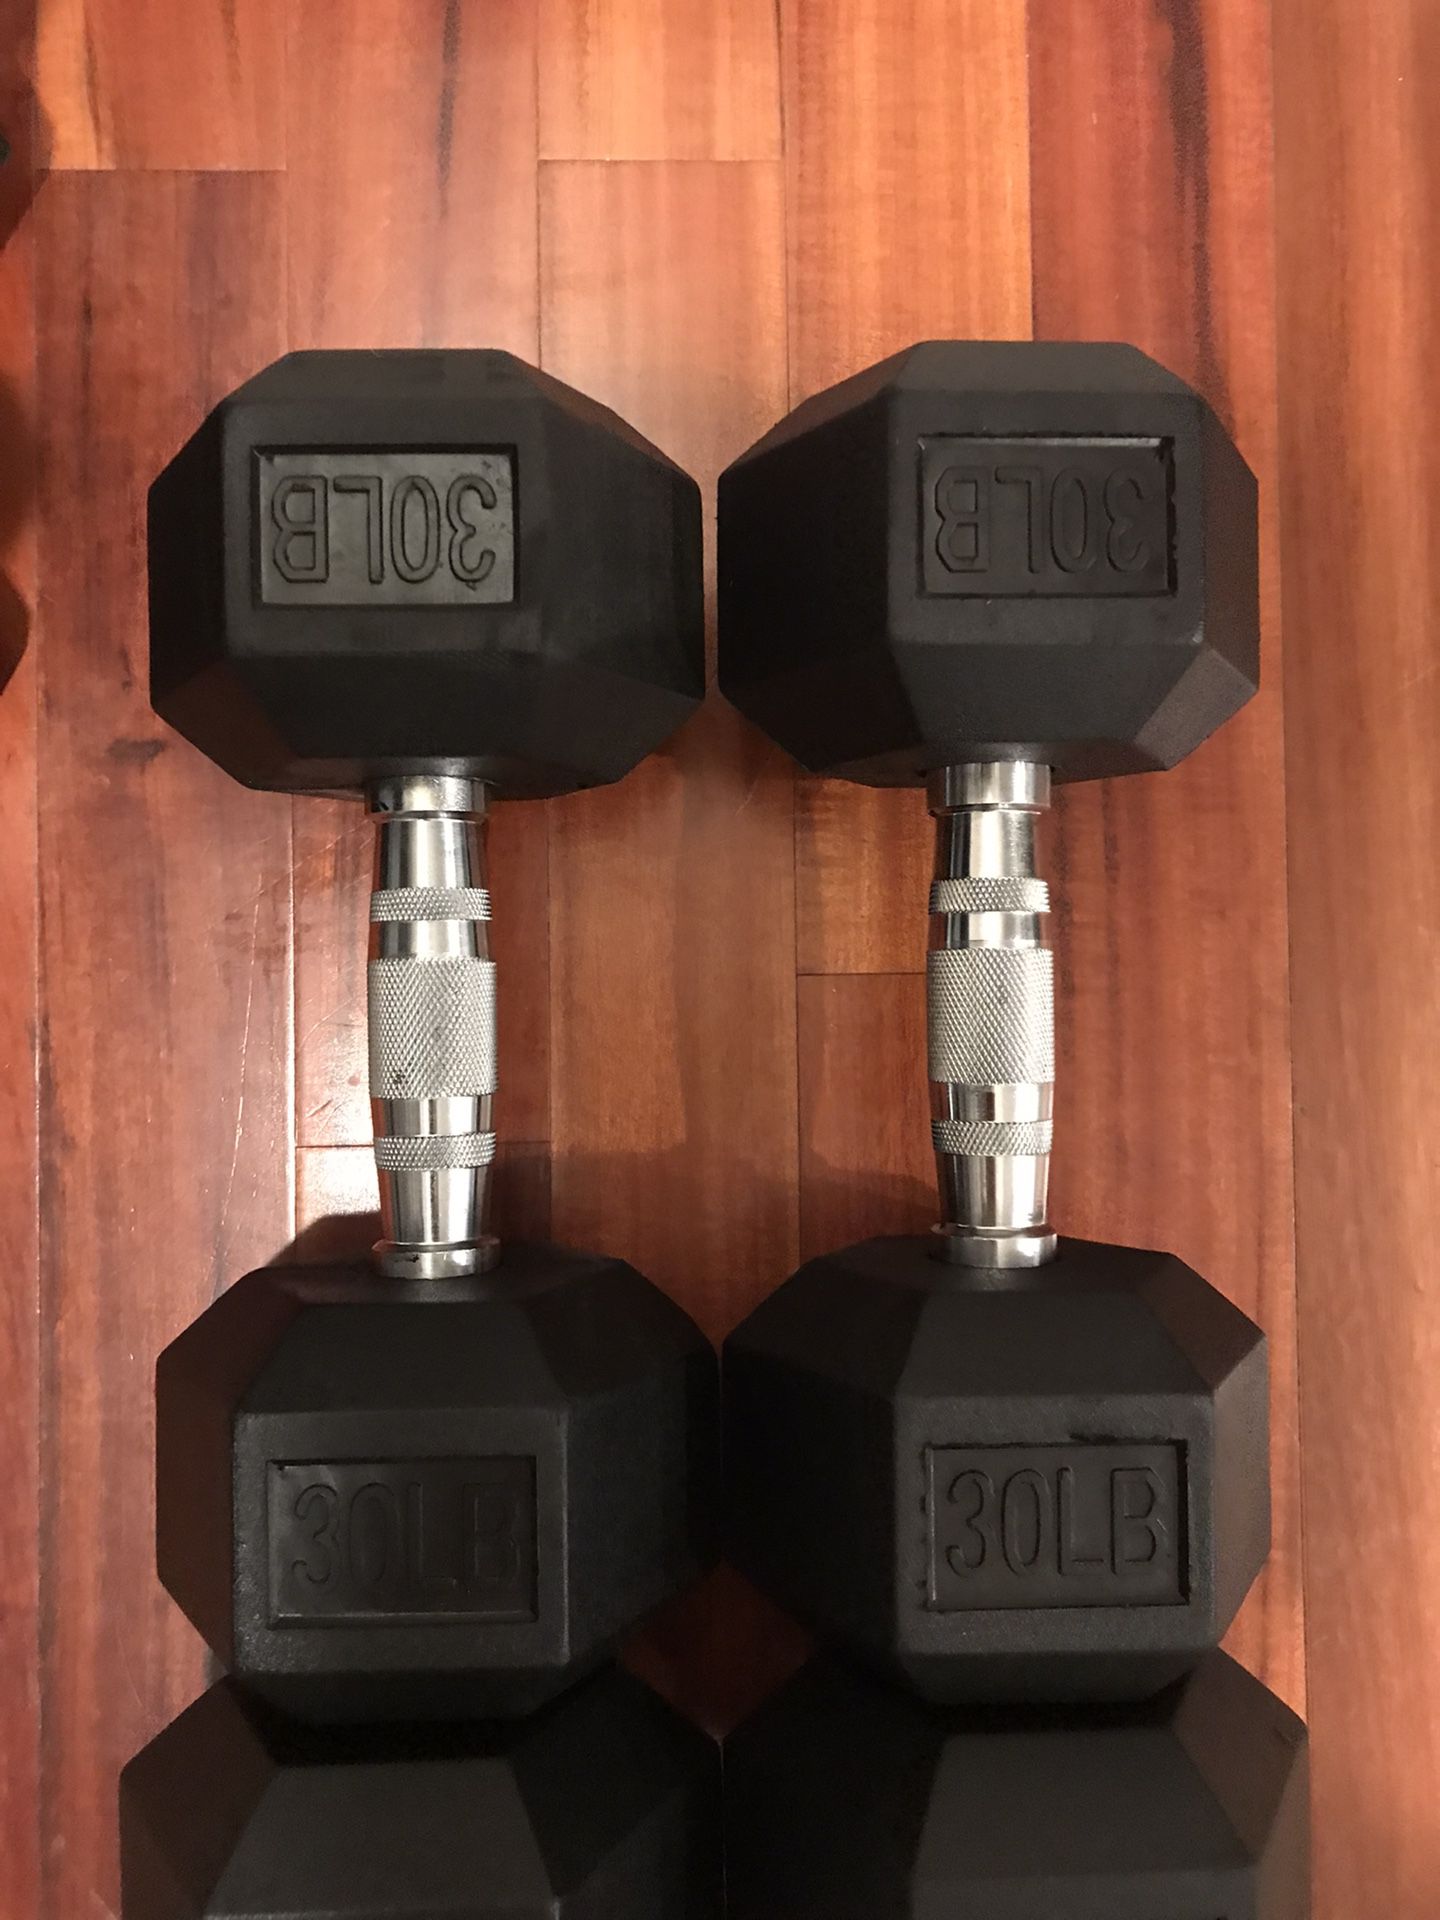 New Rubber Coated Hex Dumbbells 💪 (2x30Lbs) for $48 Firm